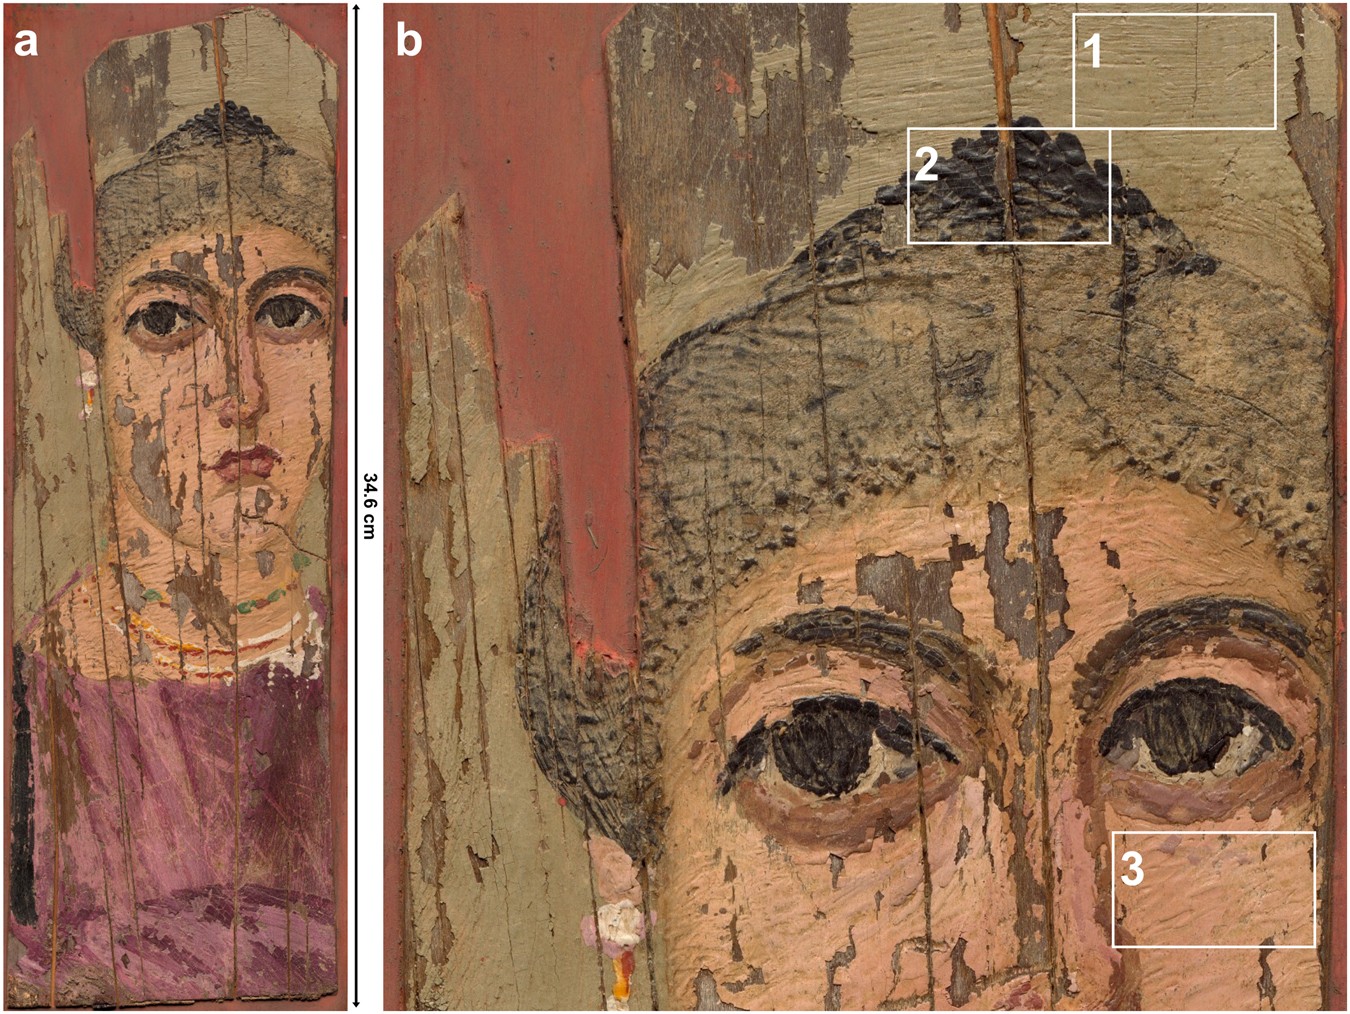 Macroscale Multimodal Imaging Reveals Ancient Painting Production